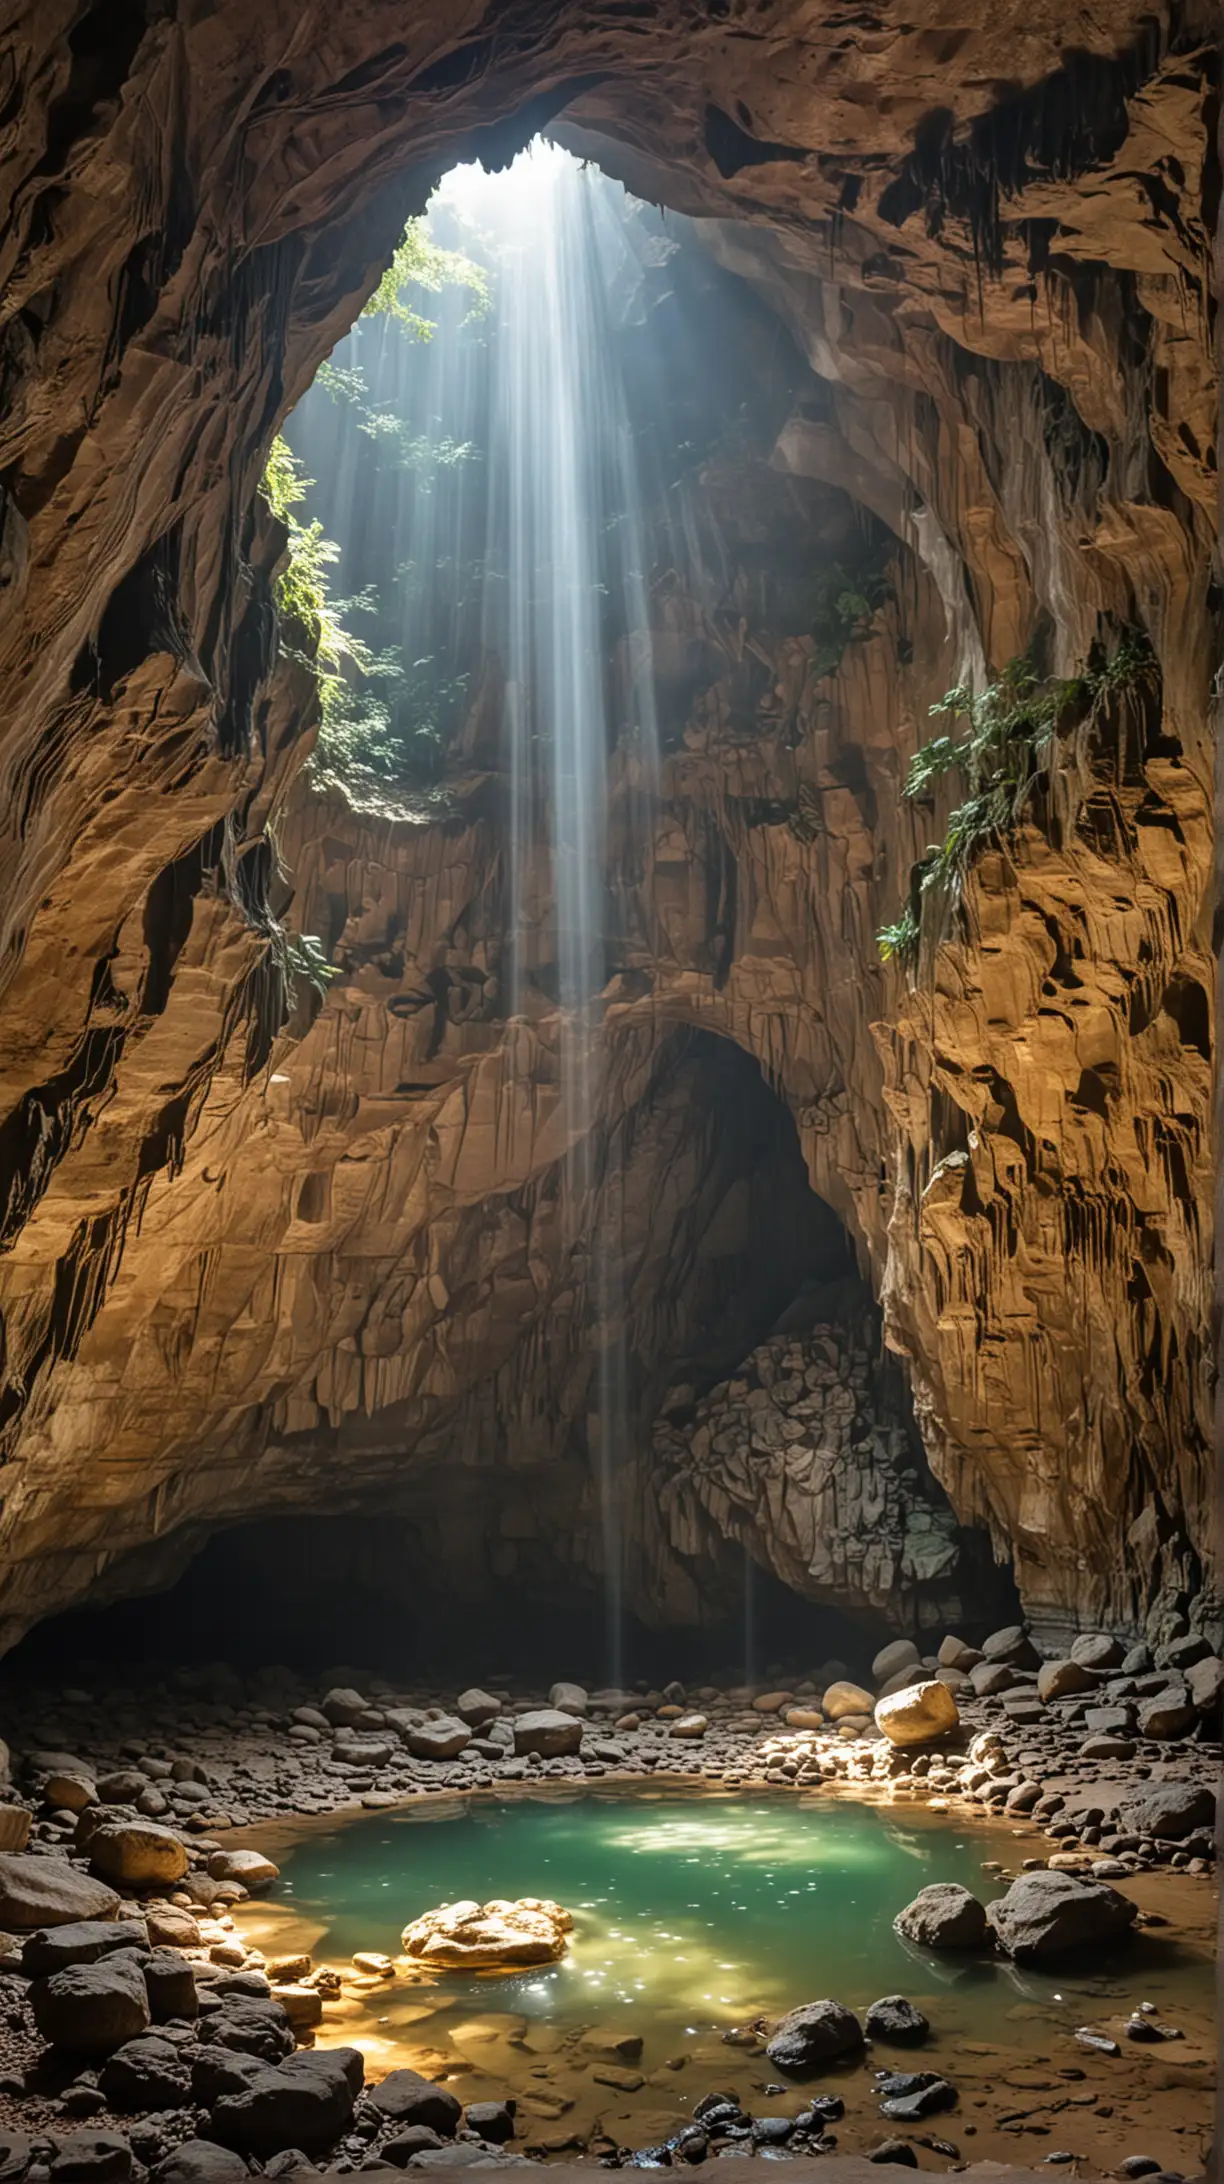 Son Doong Cave, Vietnam, show the inside of the cave